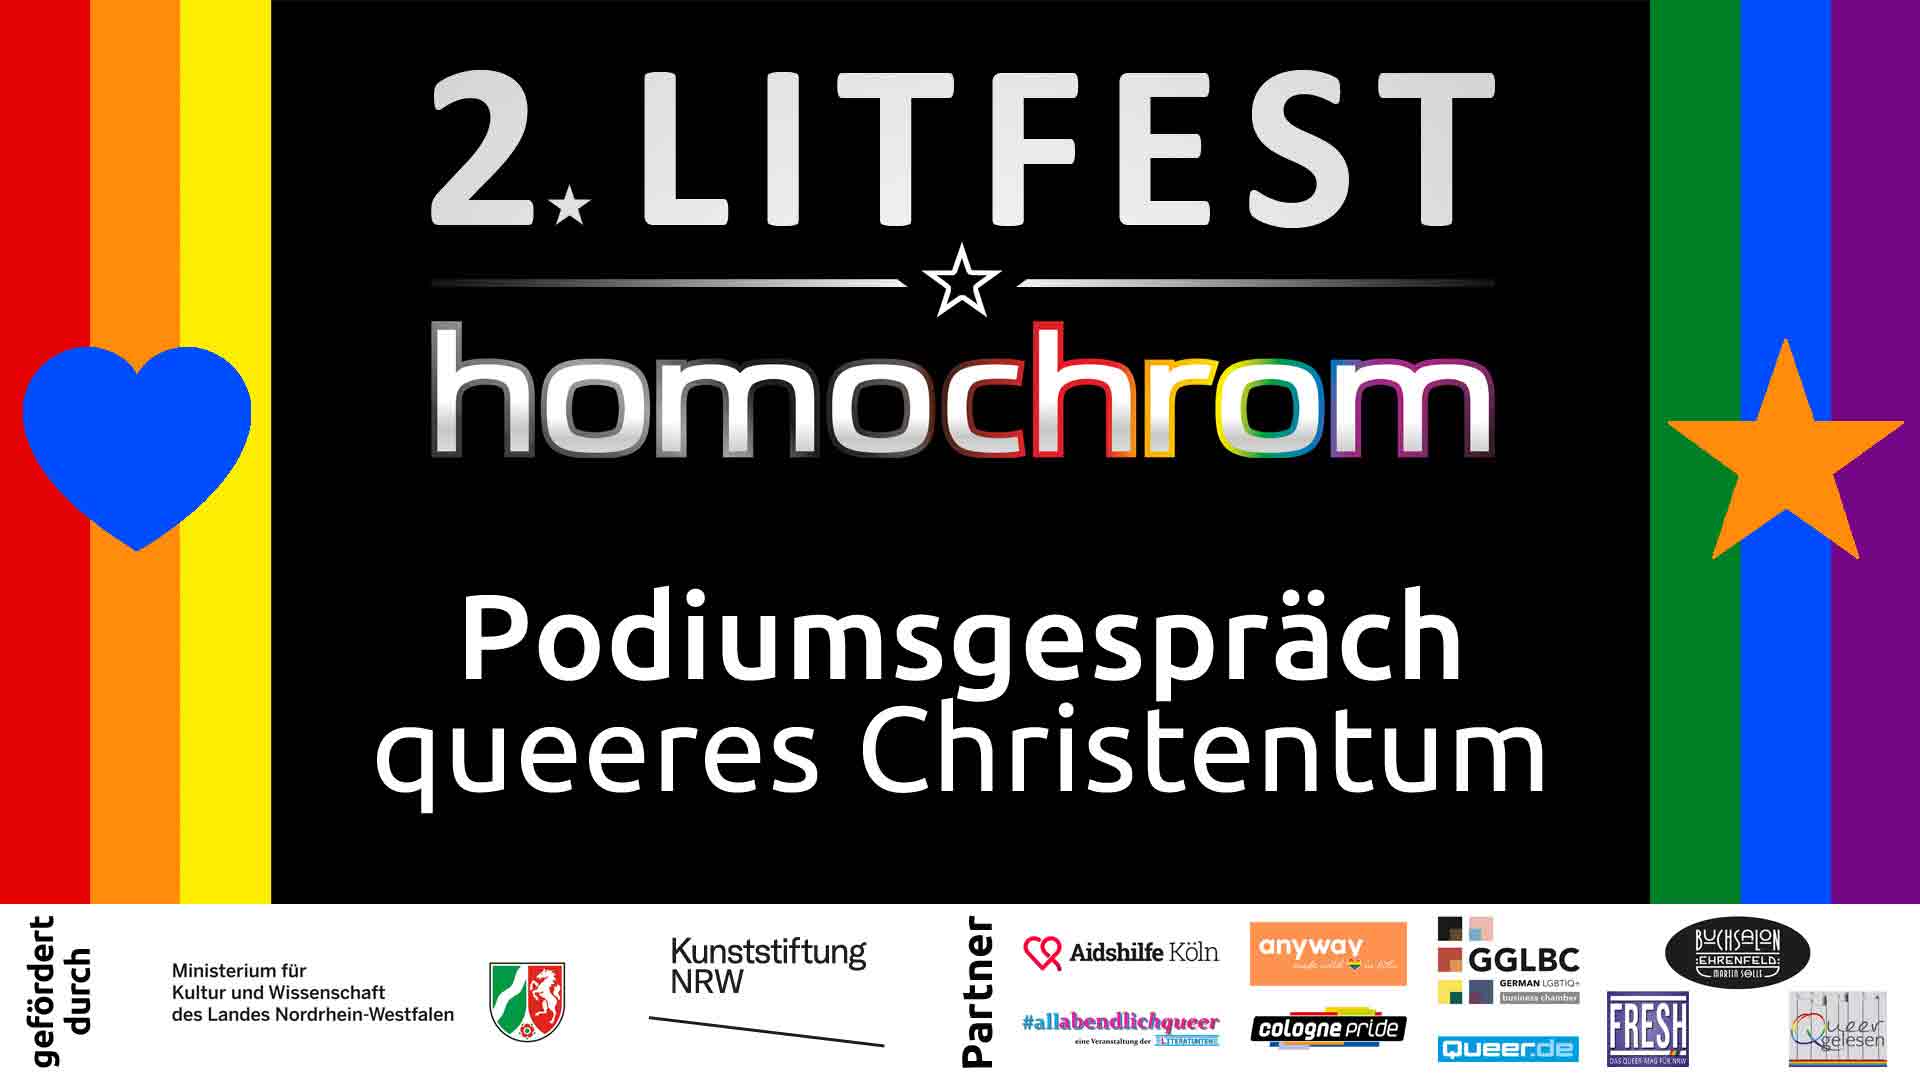 Youtube Video, Podiumsdiskussion queeres Christentum, 2. Litfest homochrom